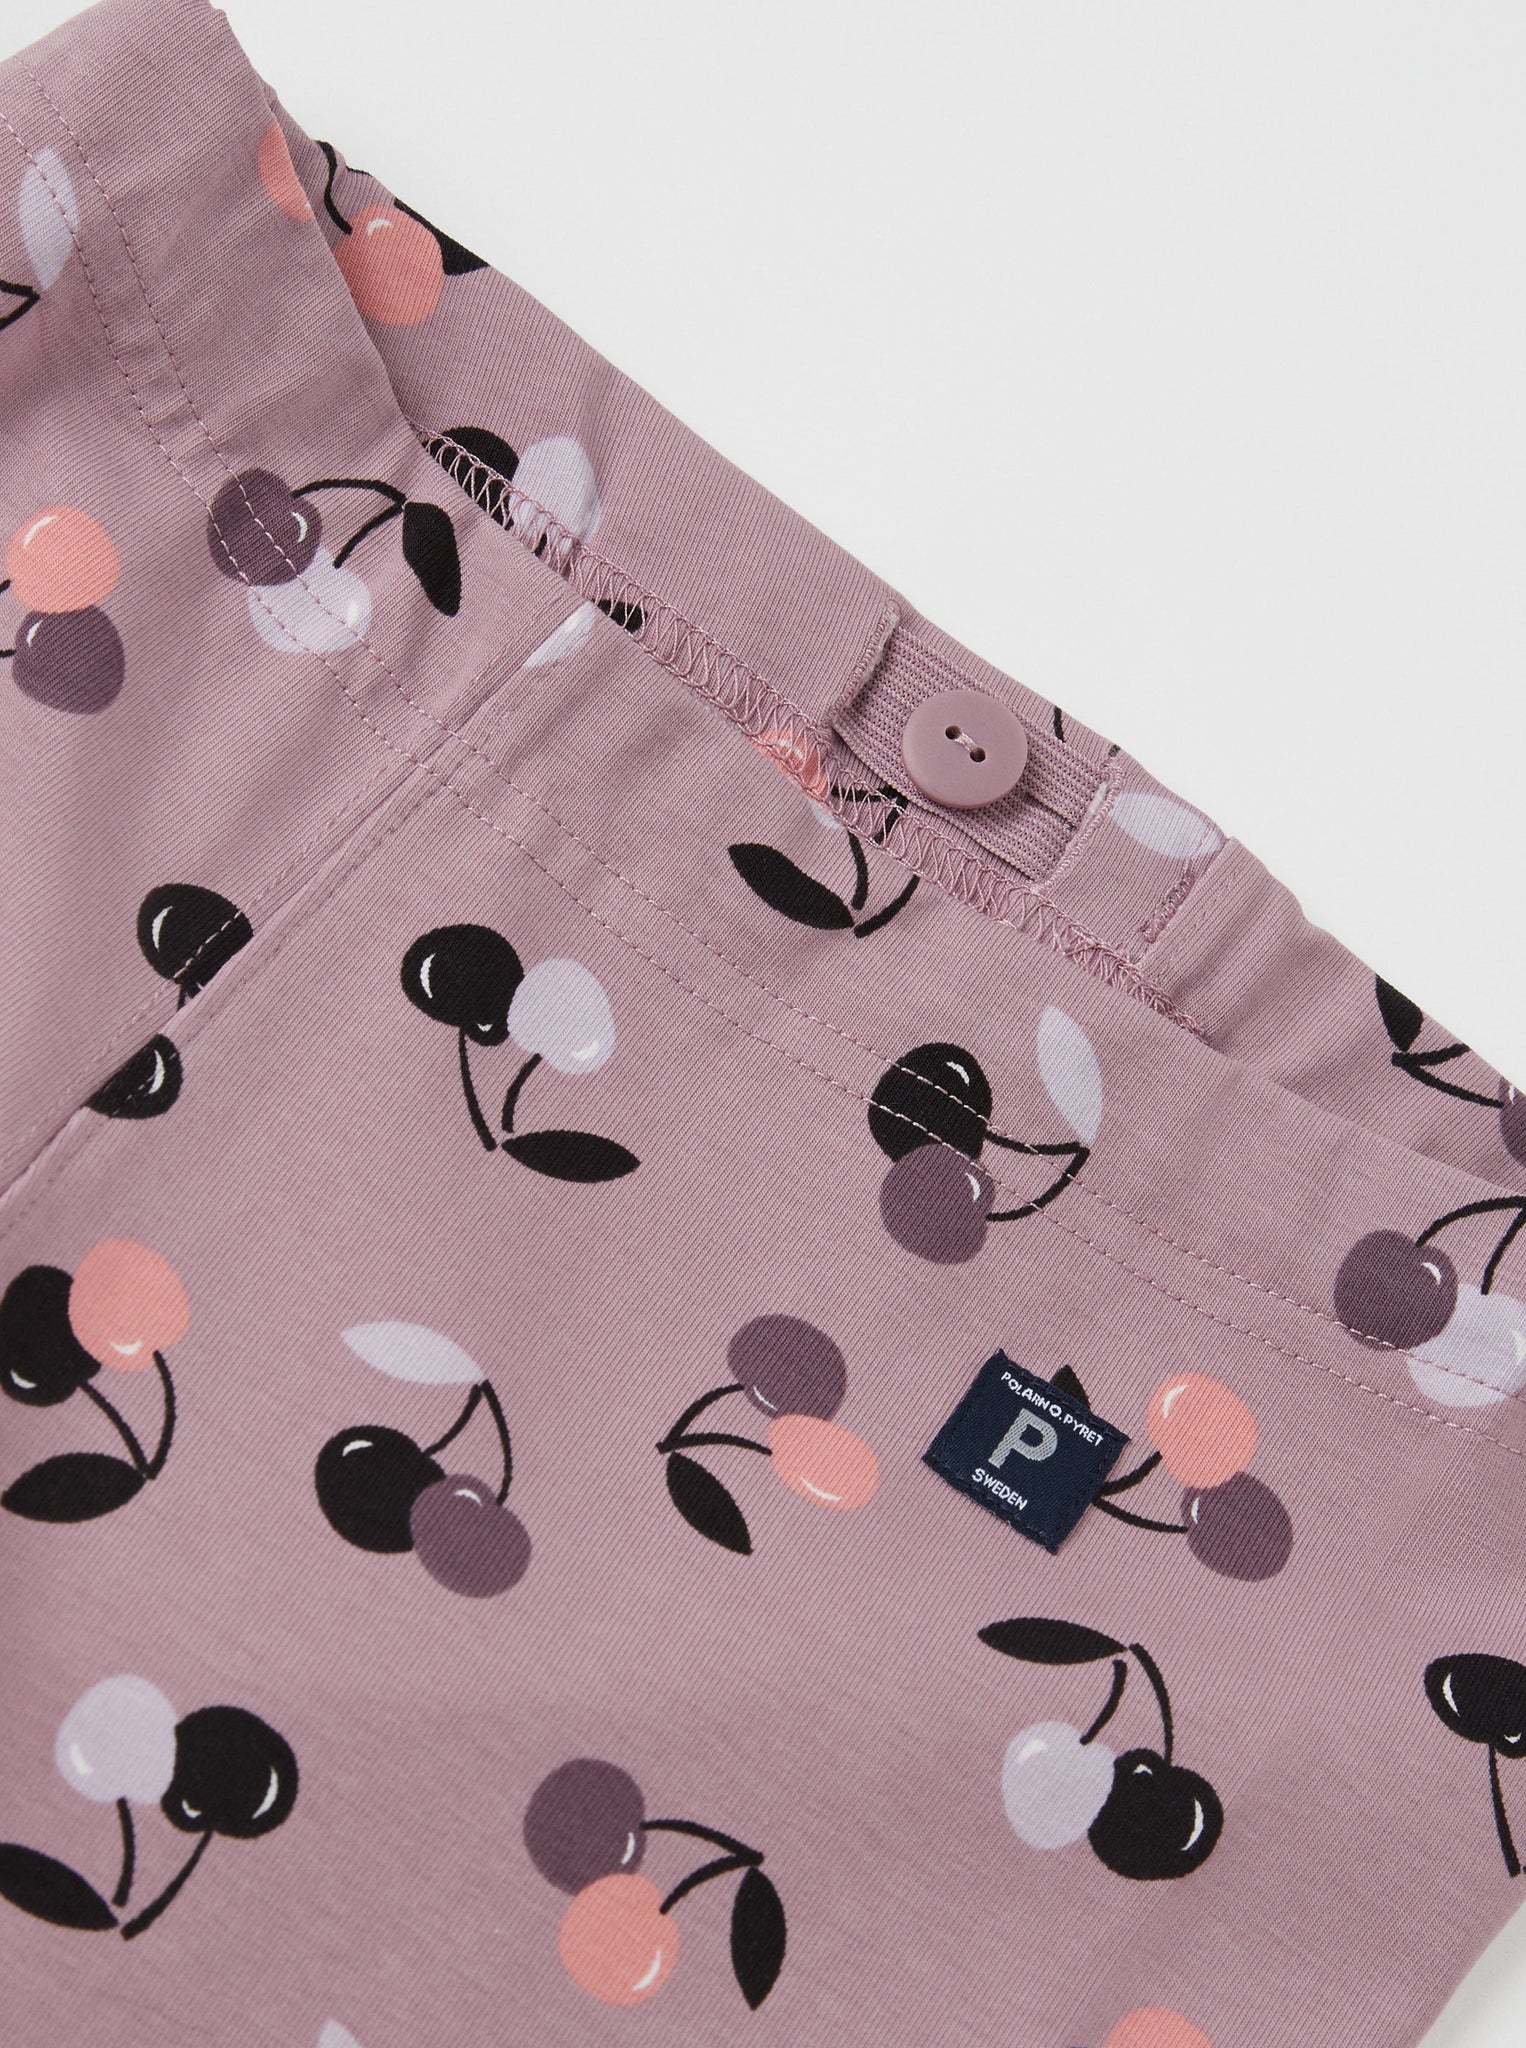 Cherry Print Pink Kids Leggings from the Polarn O. Pyret kidswear collection. The best ethical kids clothes